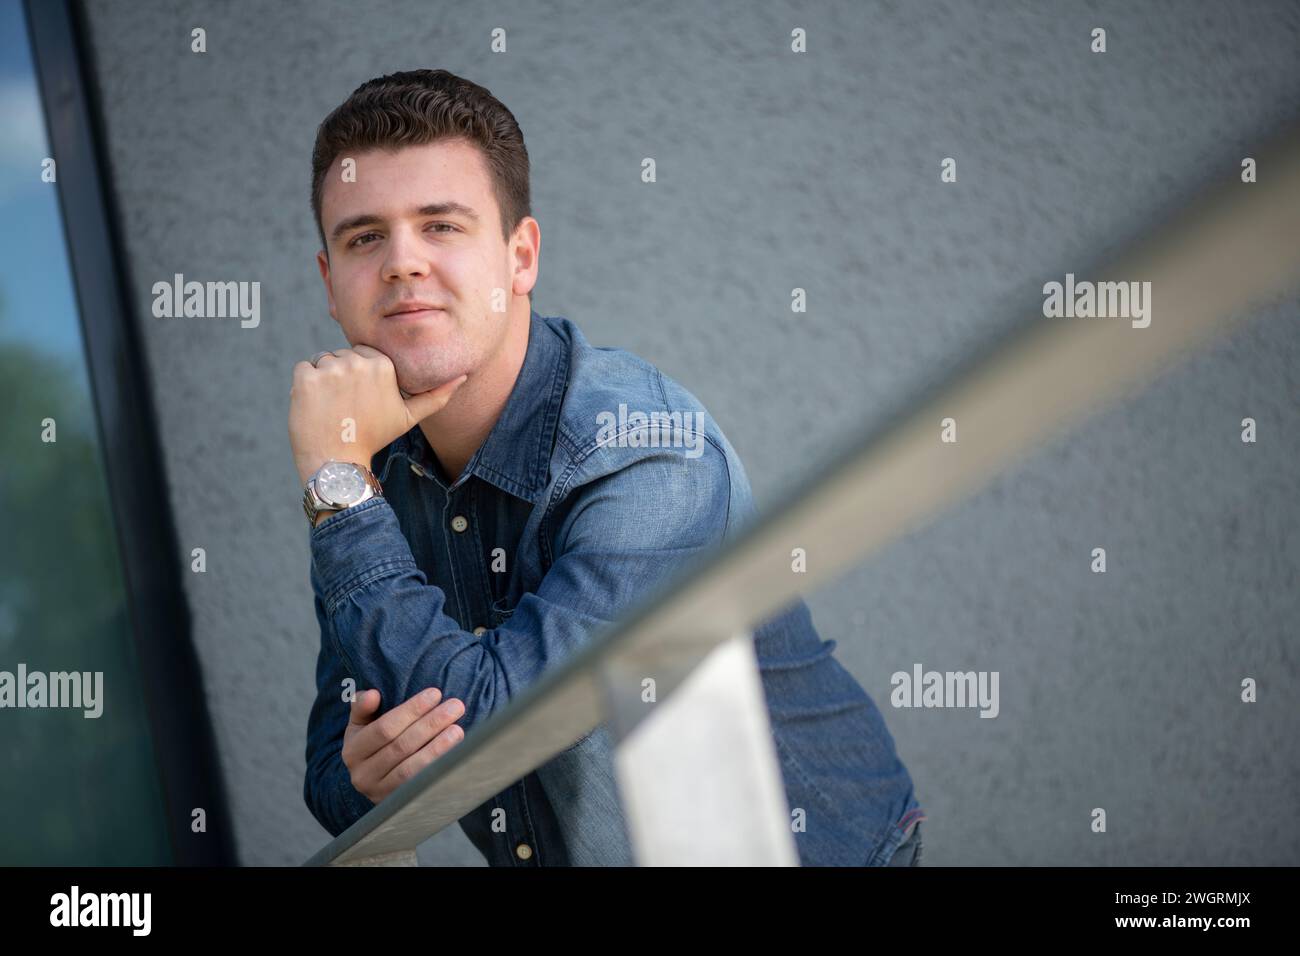 White young attractive male portrait against a grey textured wall. leaning and relaxing Stock Photo